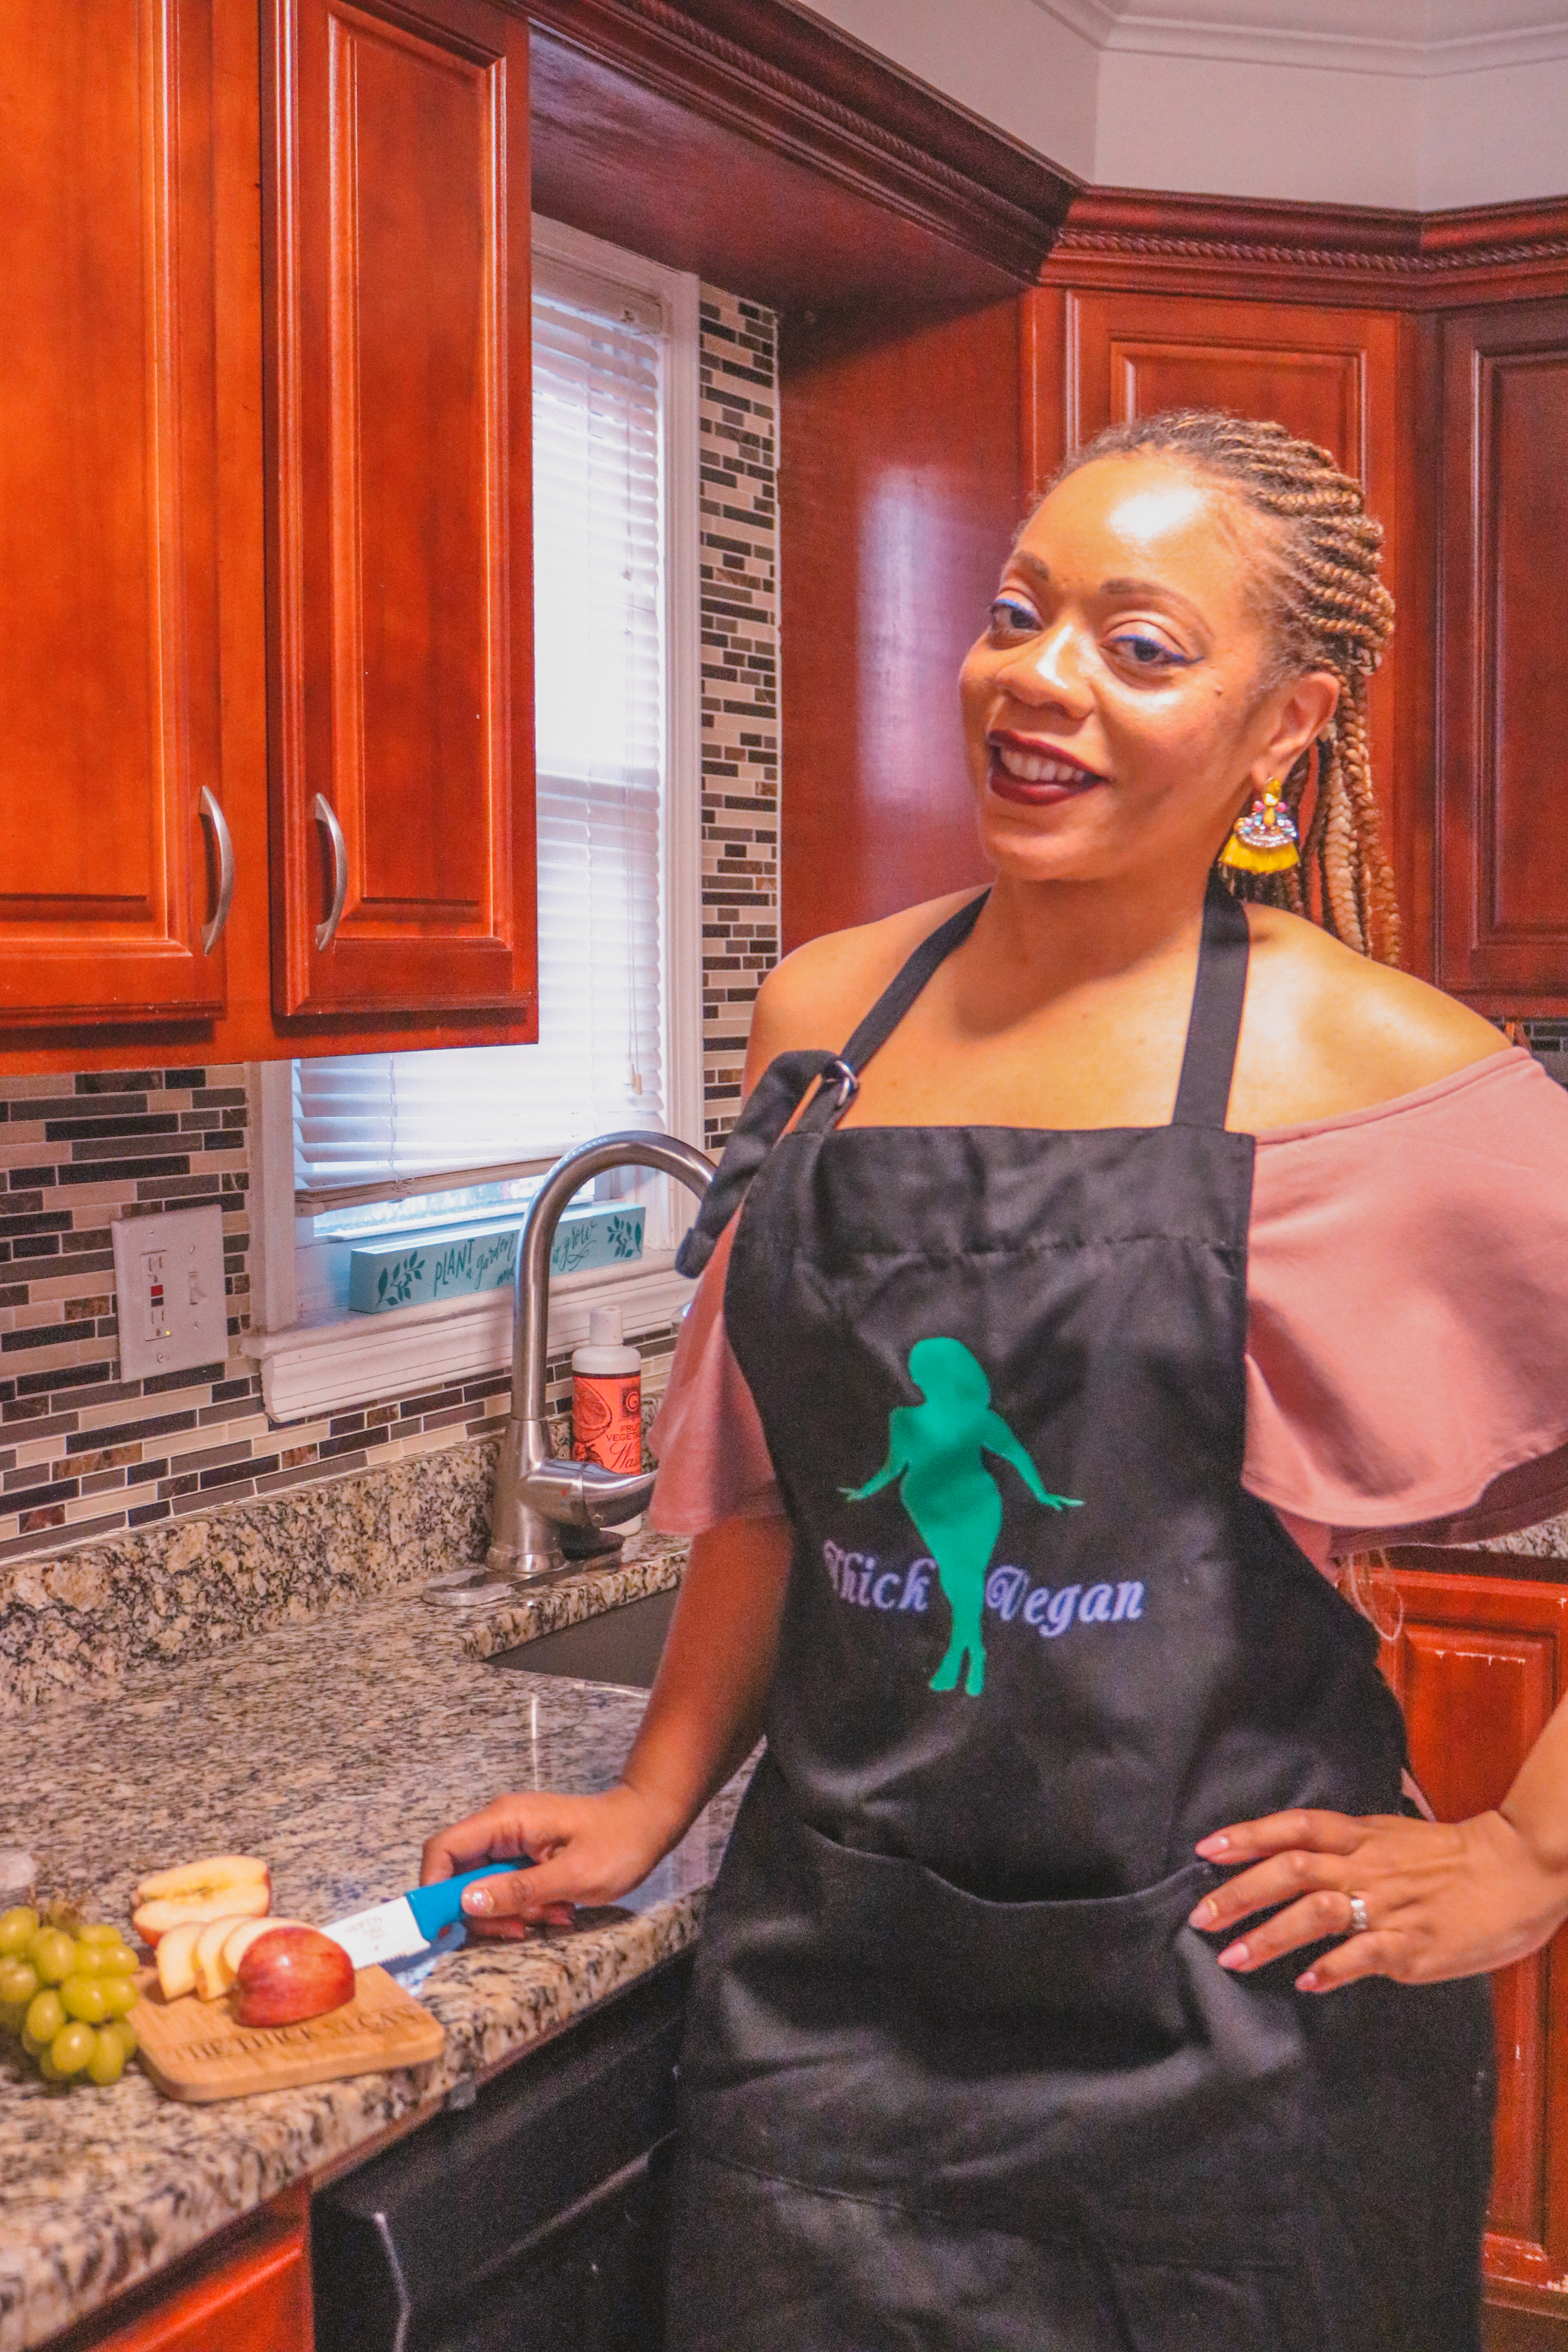 Trichelle in her Thick Vegan apron